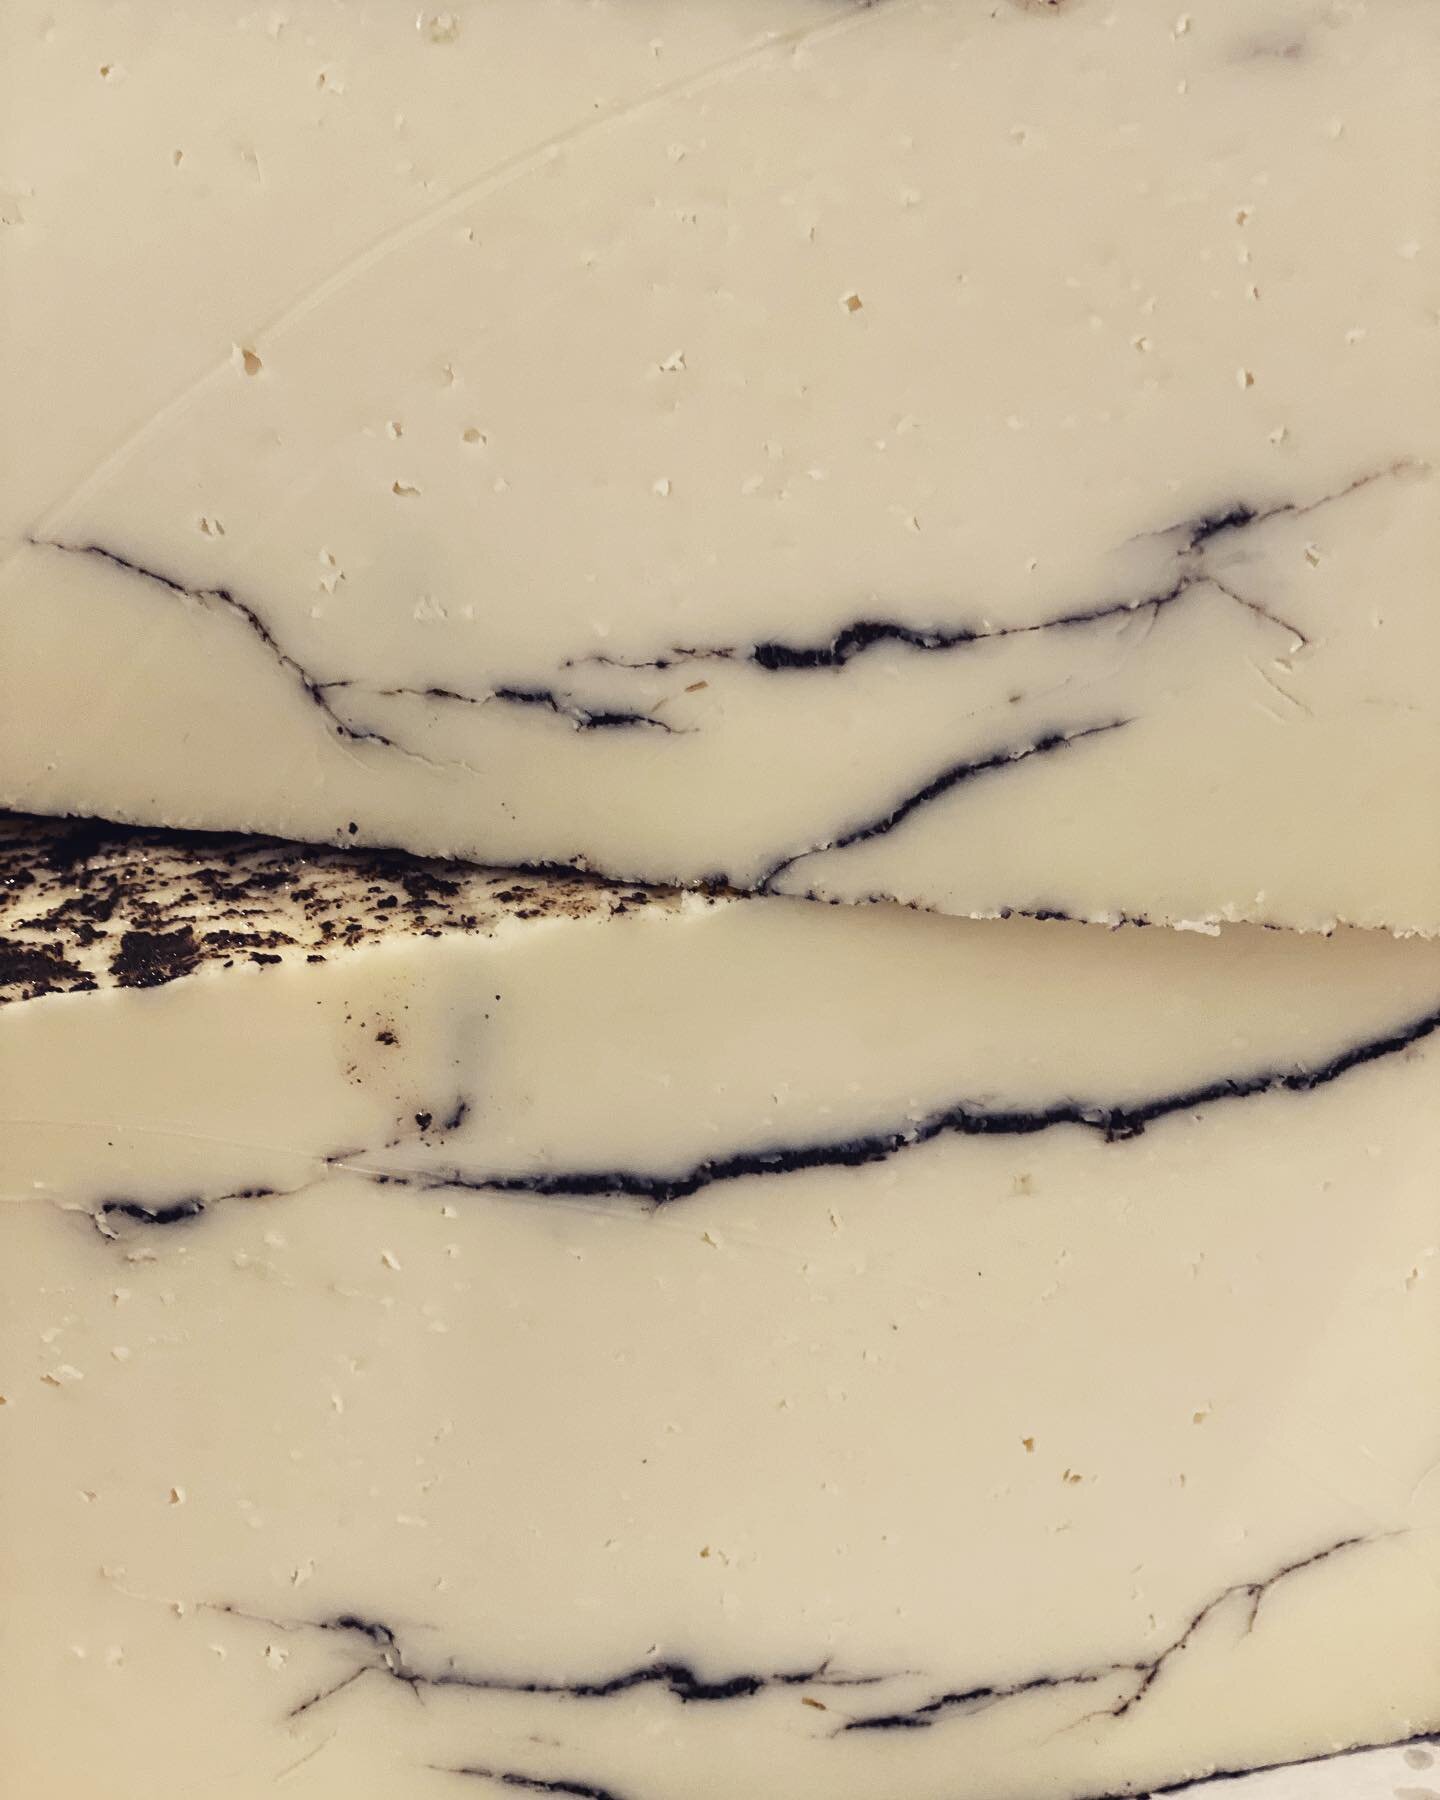 This Truffle Manchego is like a piece of artwork. New in today! Delicious flavor of truffle with a creamy texture.#cheese #cheesedisplay #cheeseboard #cheeseart #cheeselover #truffle #trufflecheese #manchego #sheep #shoplocal #smallbusiness #deliciou